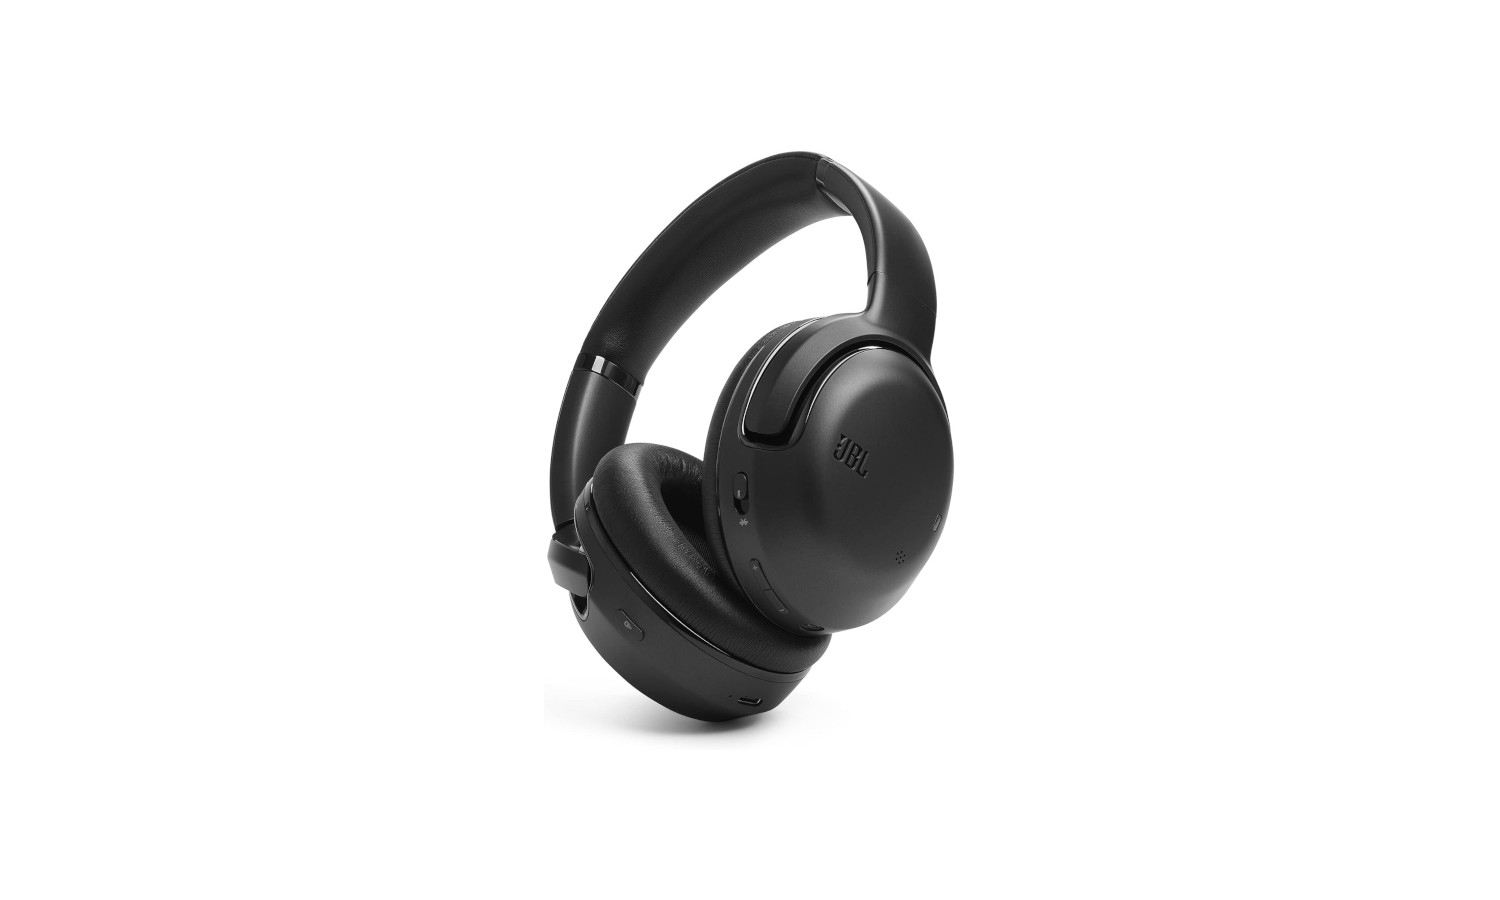 JBL Tour One M2 ANC Headphones with up to 50hrs of playback